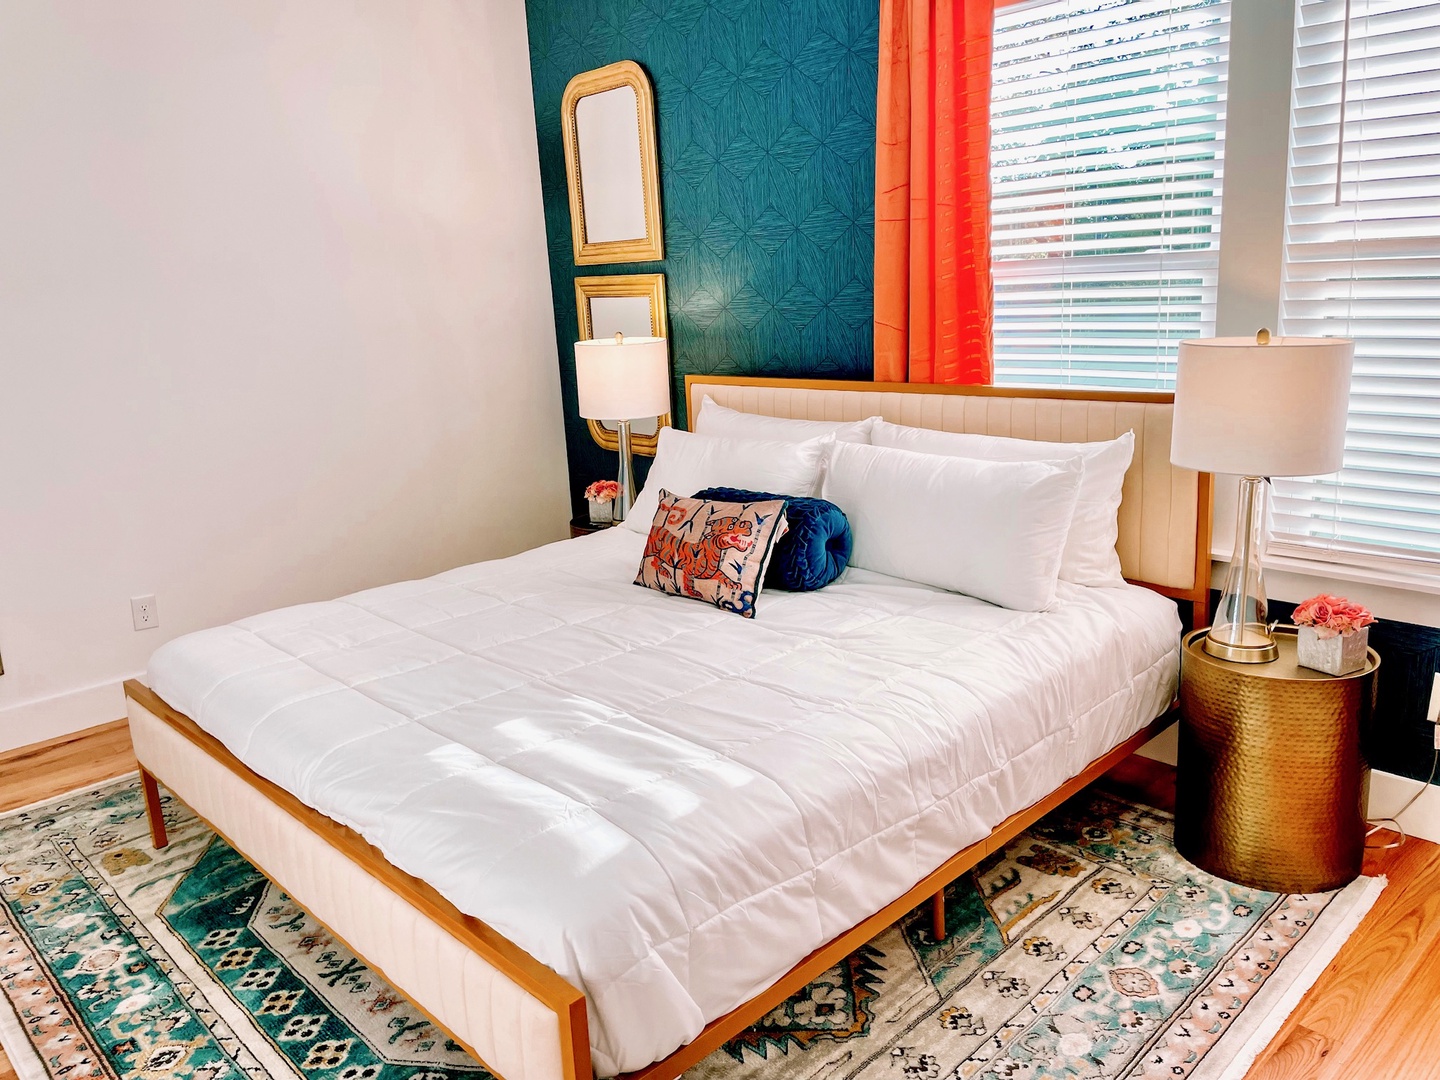 Bedroom 3 offers a king-sized bed, Smart TV, and Jack & Jill bath